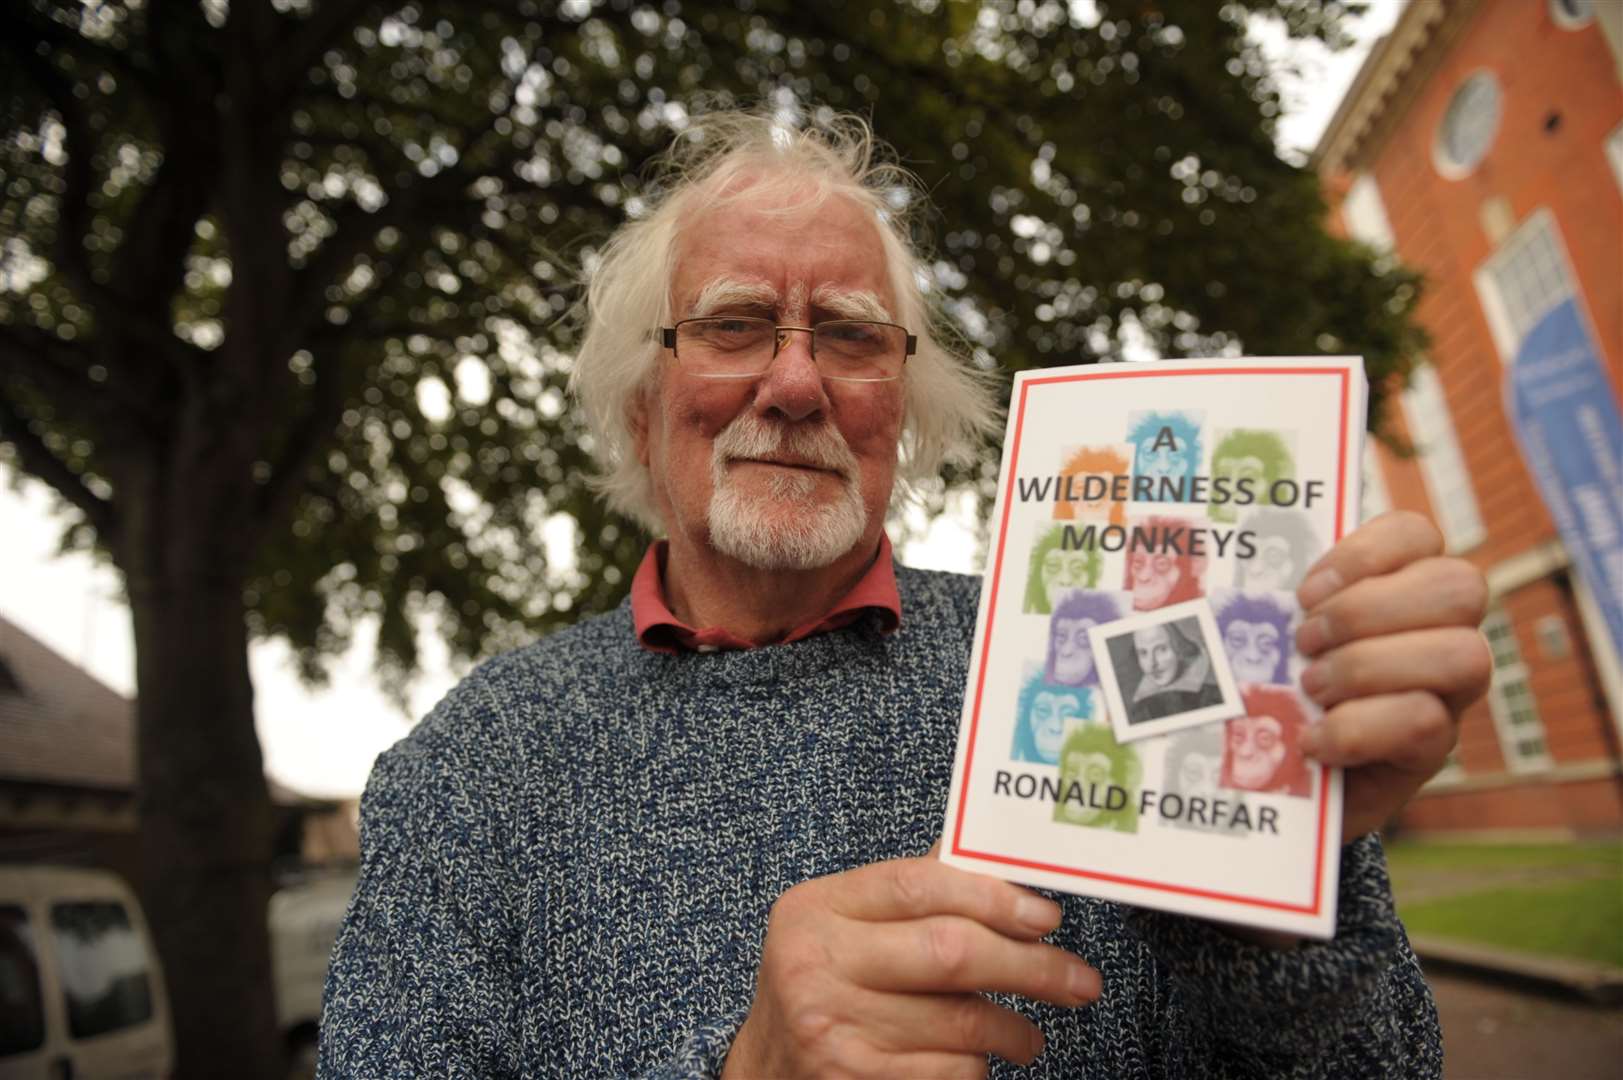 Rochester resident Ronald Forfar with his book